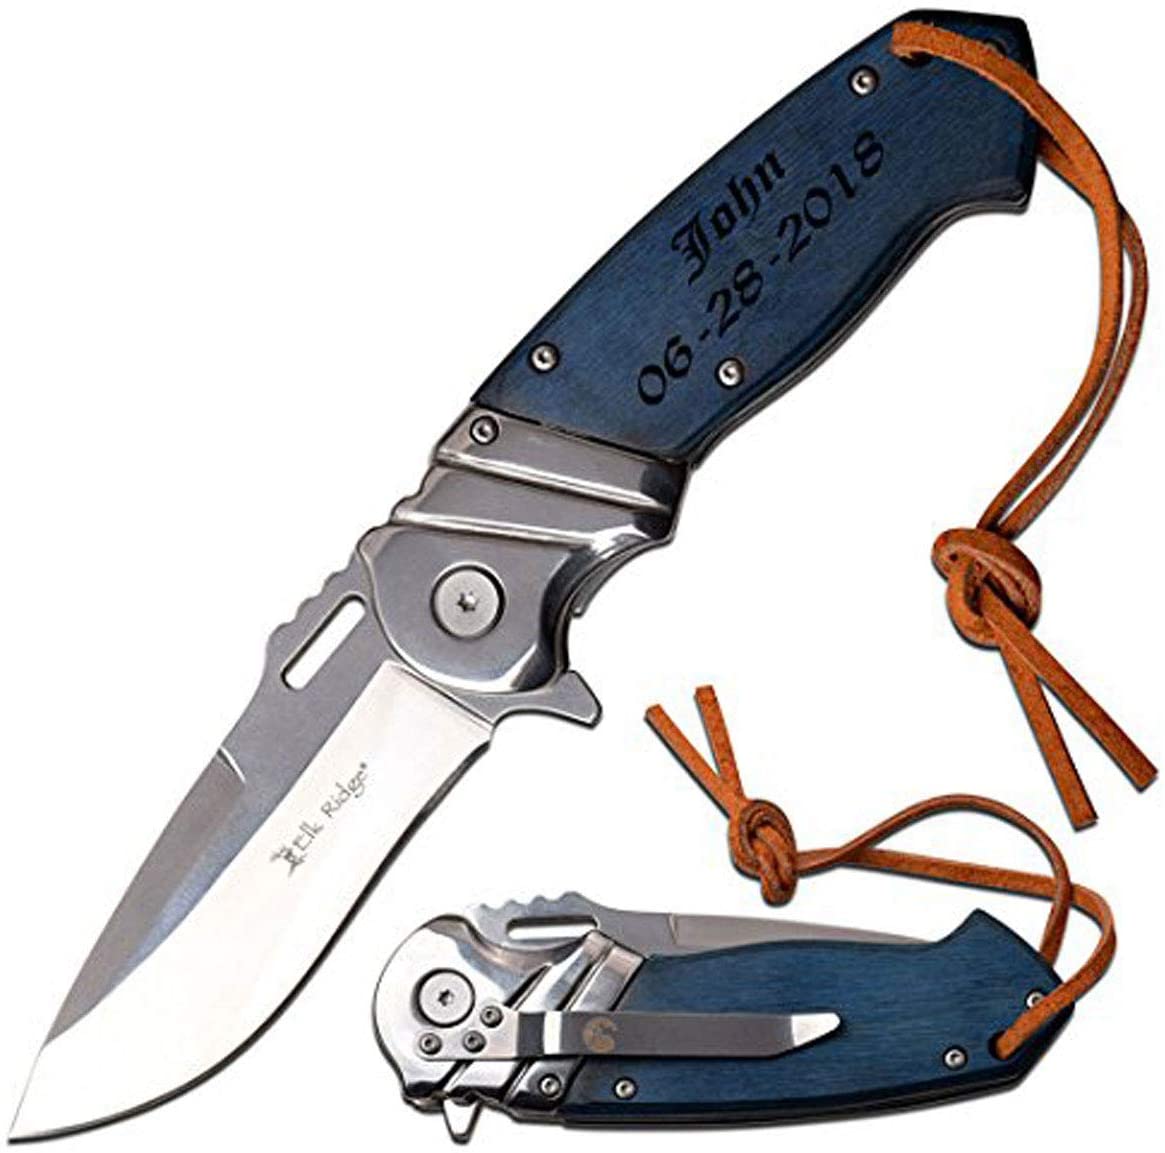 GIFTS INFINITY Personalized Engraving - 4.75" Closed Pakkawood Handle Spring Assisted Quality Pocket Knife